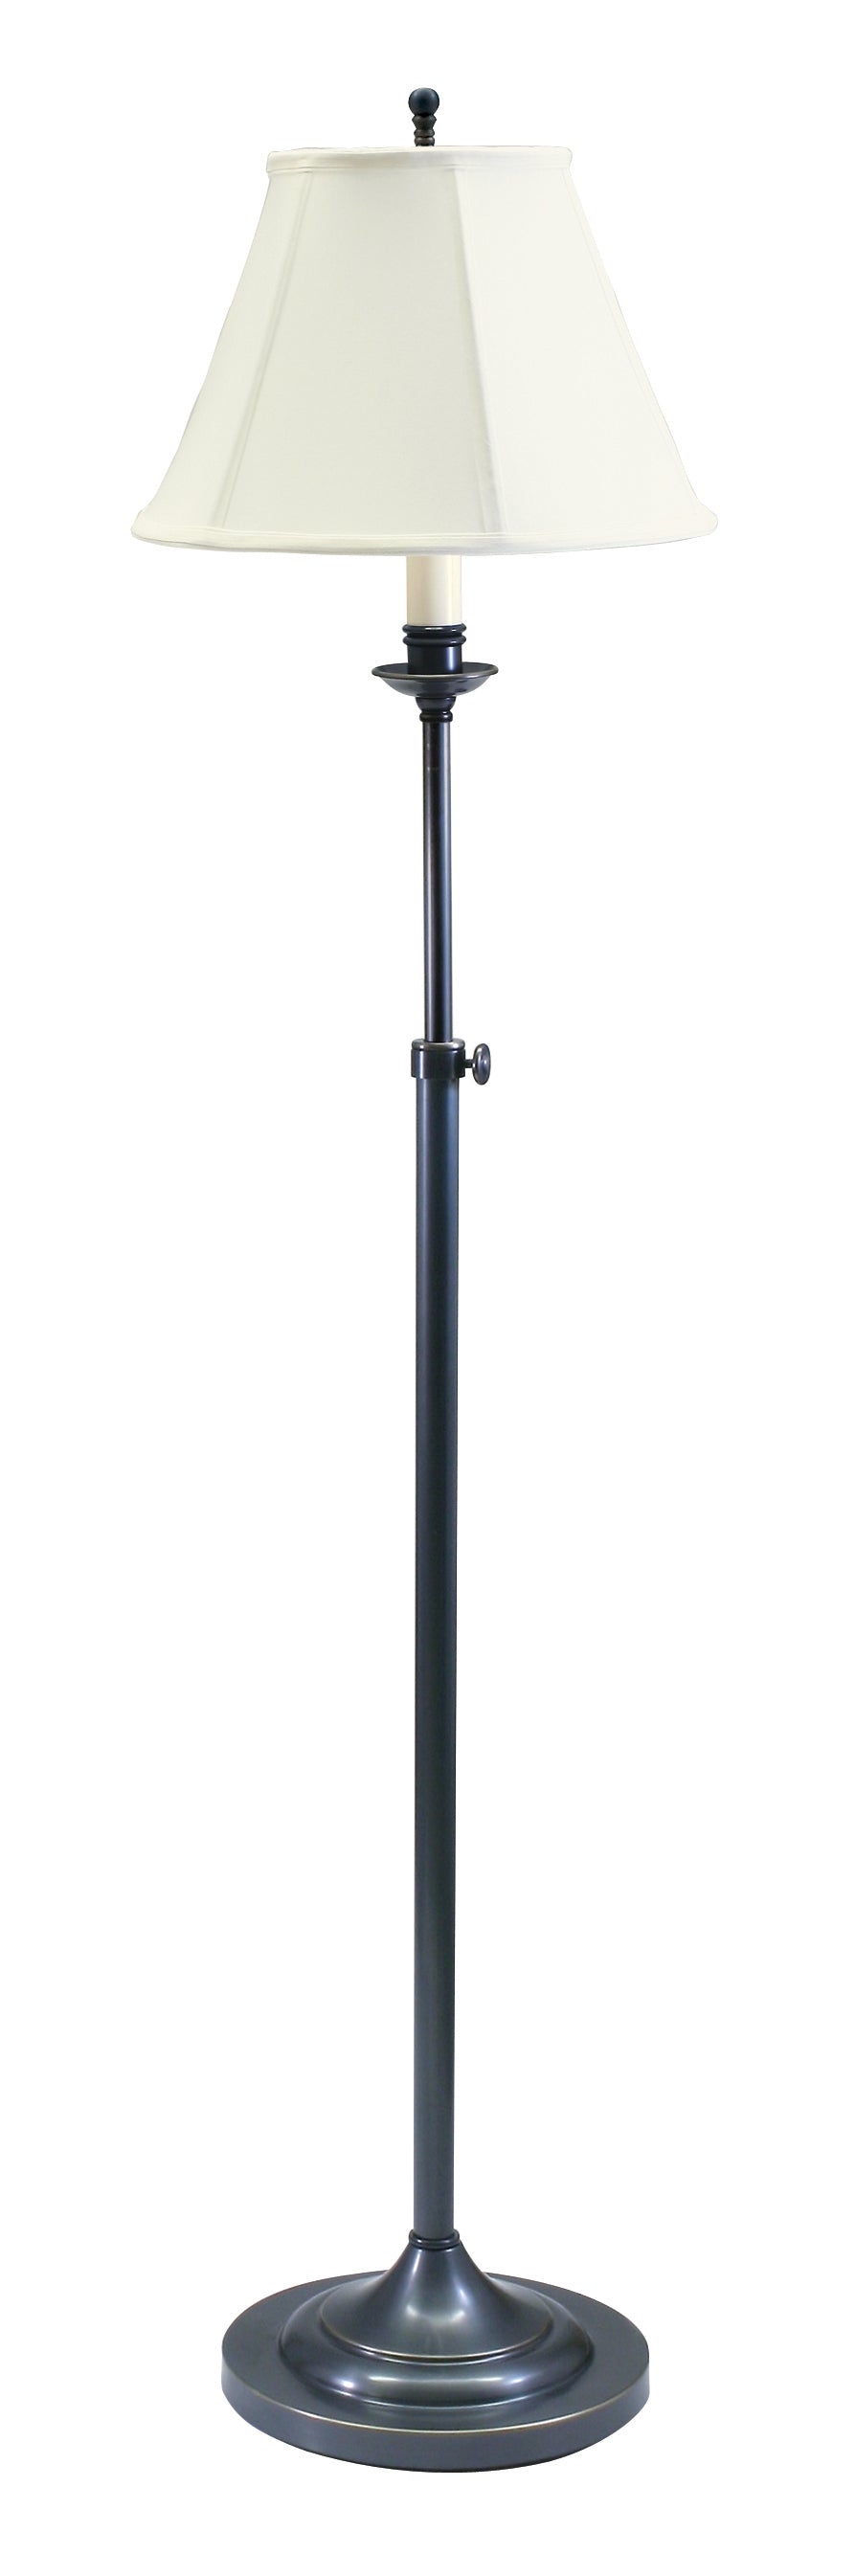 House of Troy Club Adjustable Oil Rubbed Bronze Floor Lamp CL201-OB